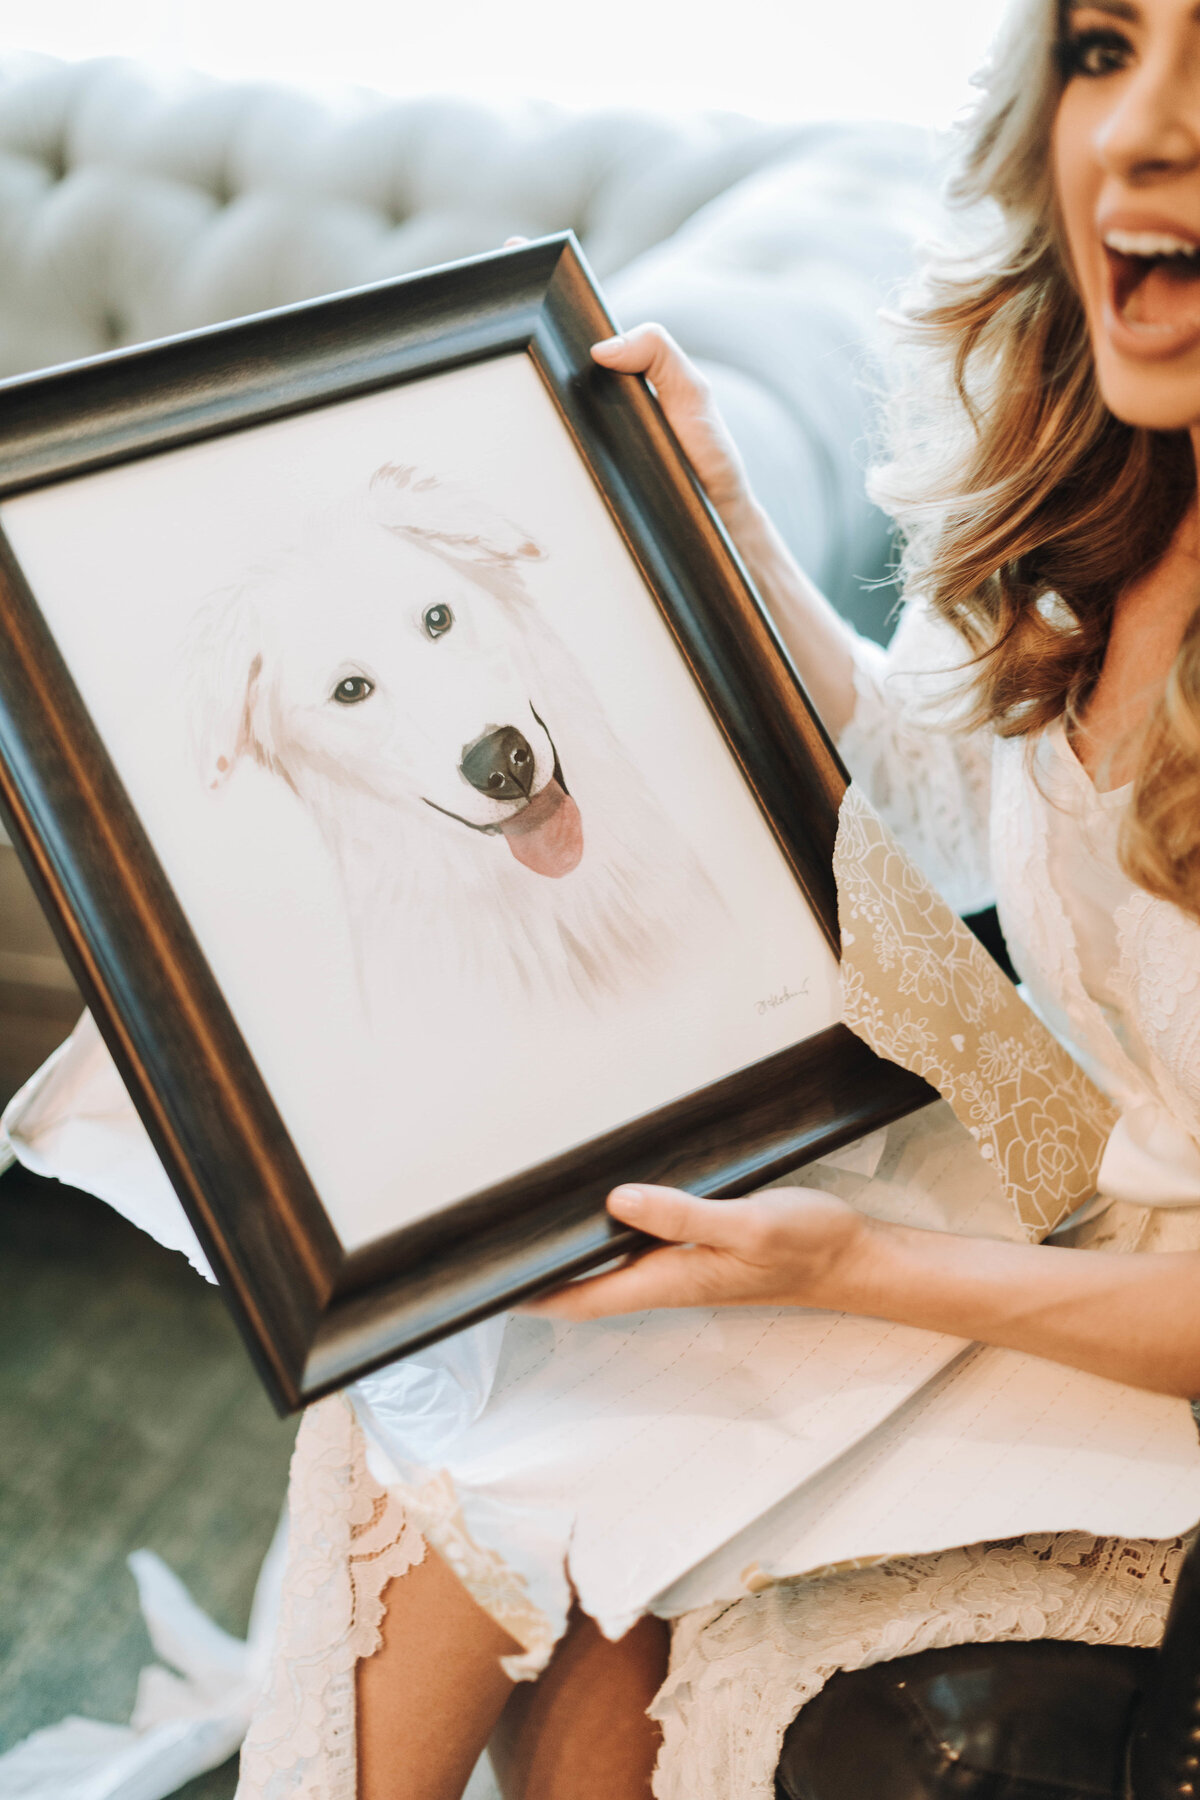 Brides gift from the Groom of  a sketch of their dog